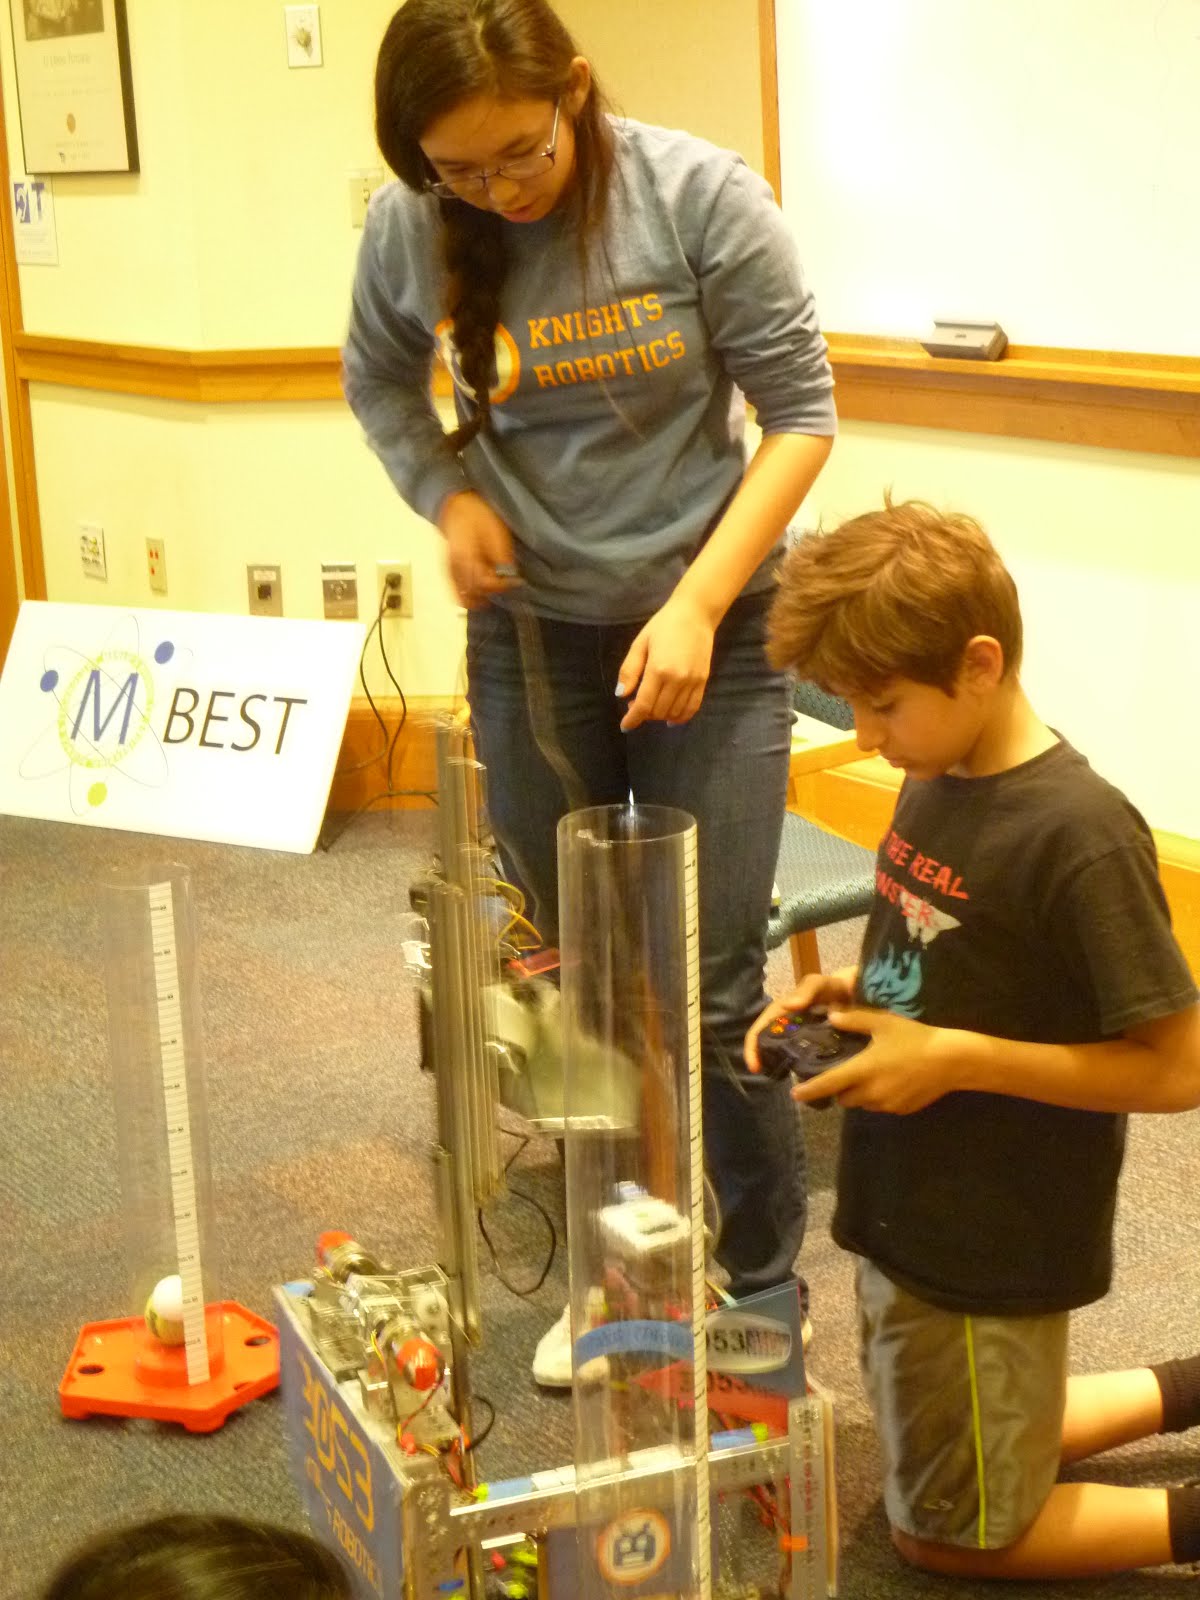 Fun with Robots, Science and Math - created by Youth for Literacy and the Council